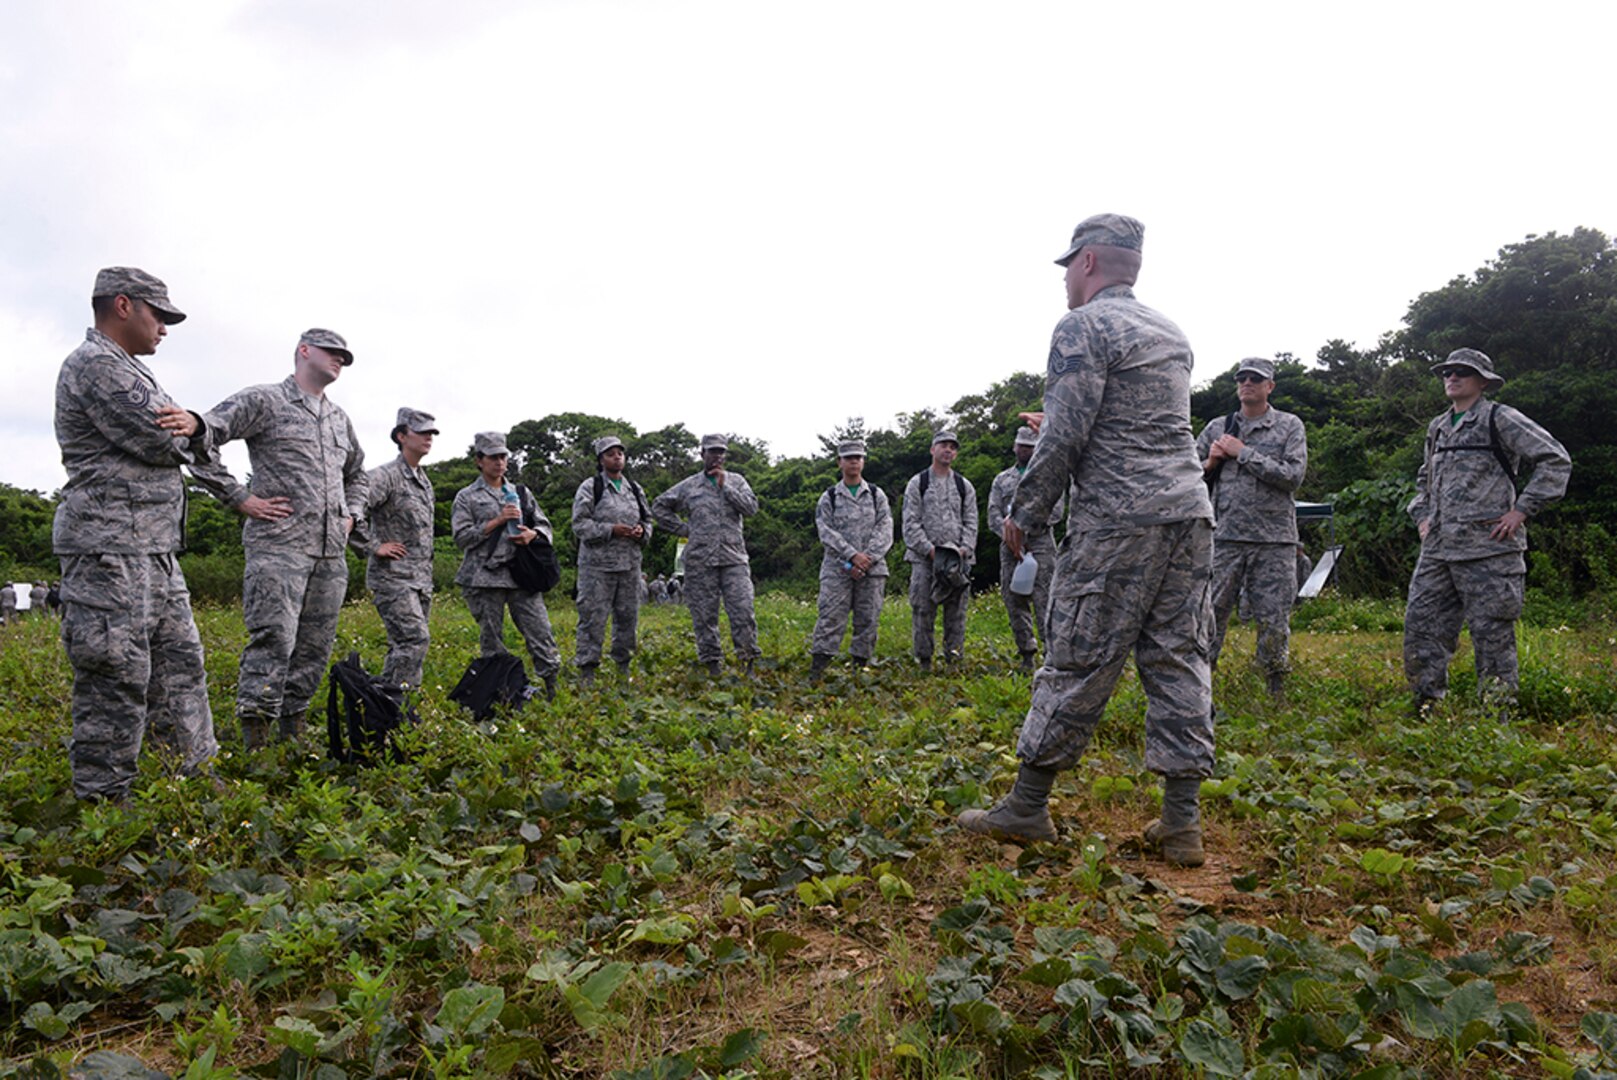 Airmen from the 18th Medical Group receive an eye-care briefing during a field training day May 20, 2016, at Area One, Kadena Air Base Japan. Airmen broke down into smaller ‘deployed’ groups called chalk teams and cycled through seven different training stations that tested their medical knowledge and life-sustaining skillsets. 